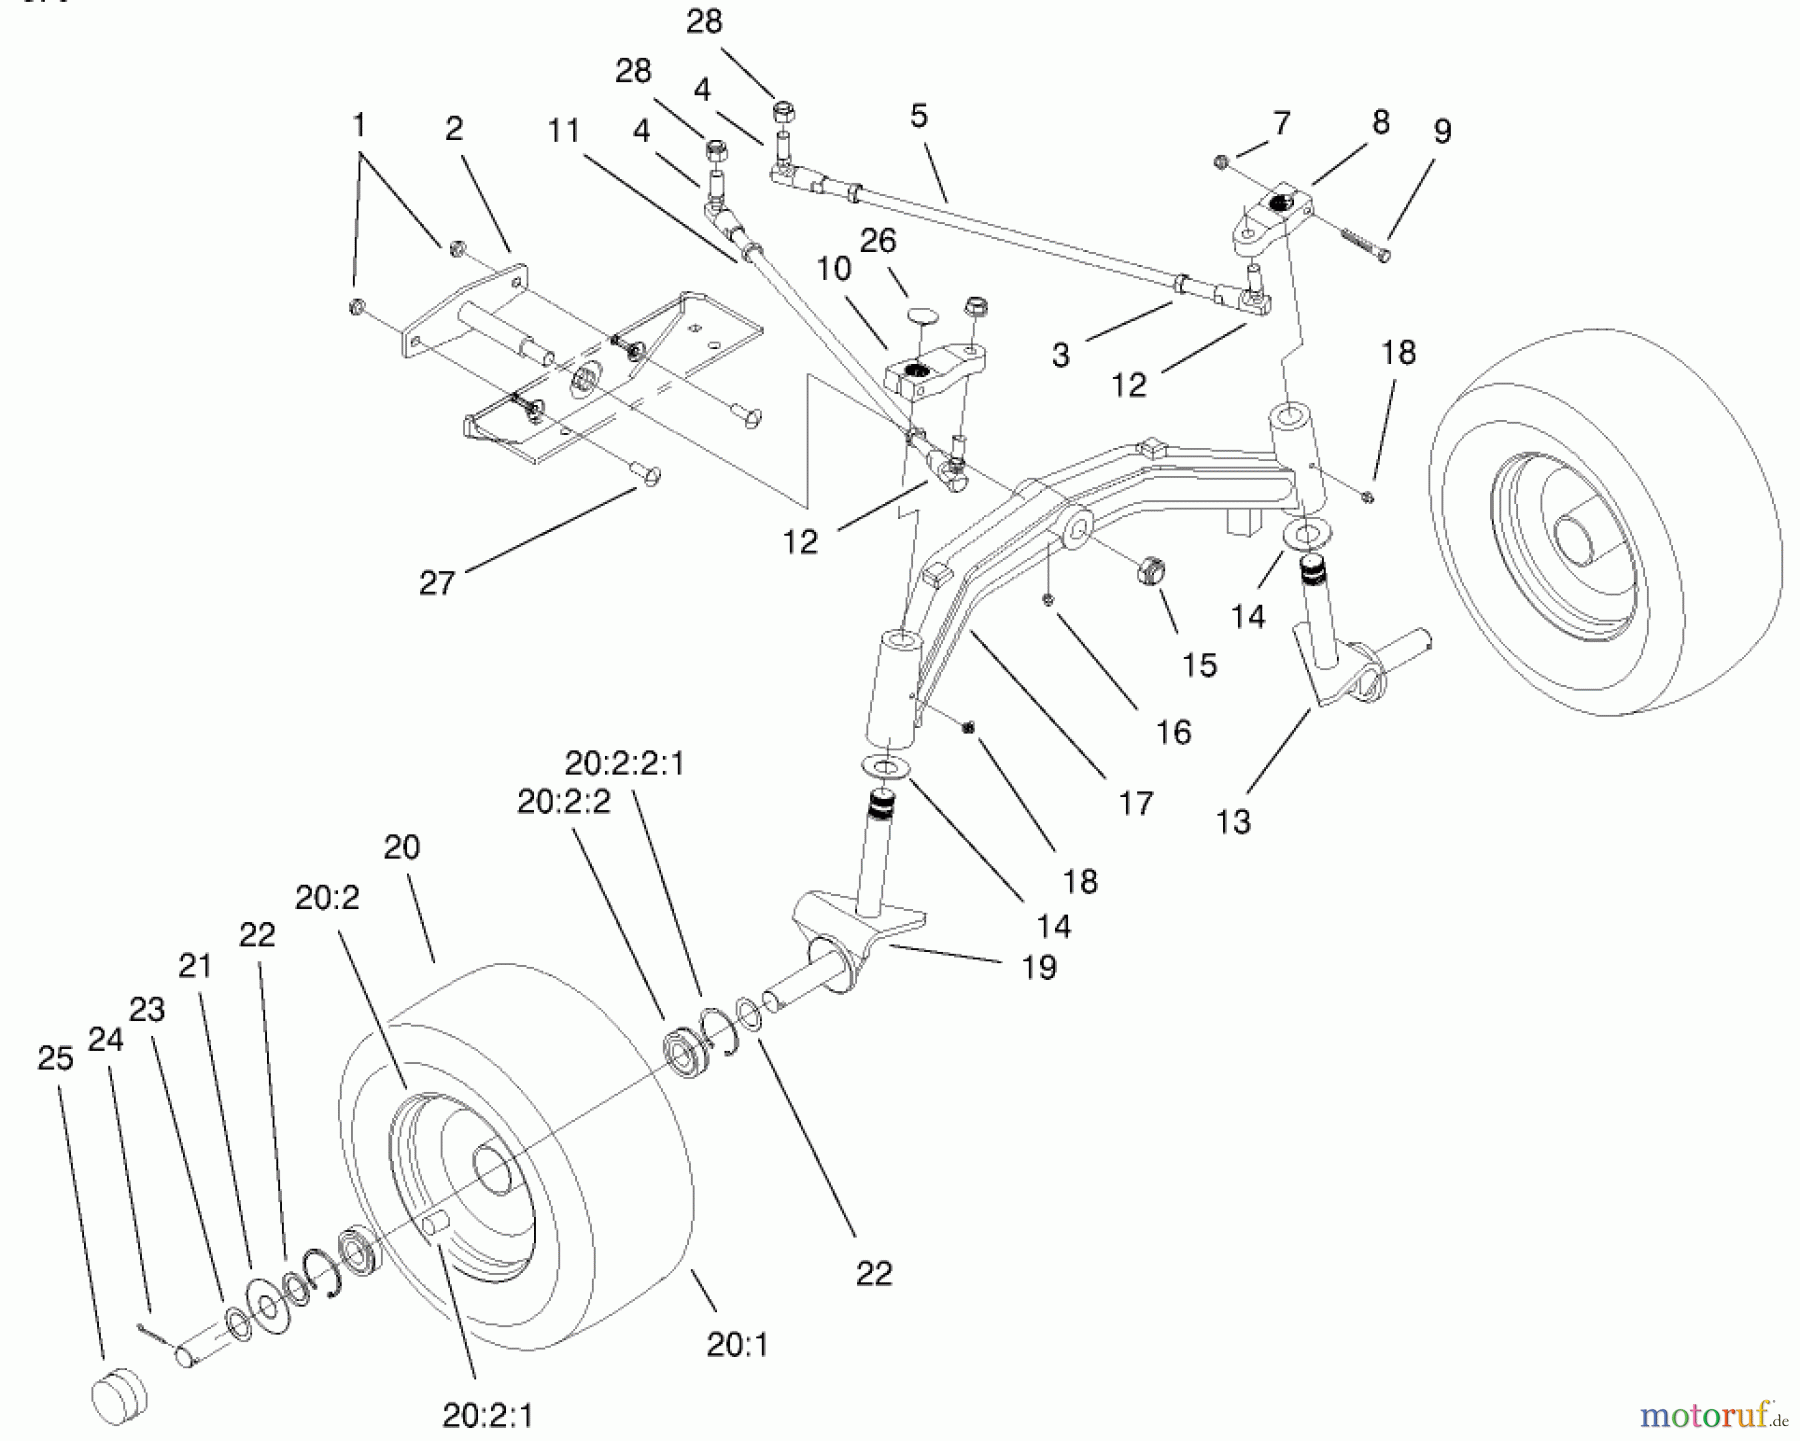  Toro Neu Mowers, Lawn & Garden Tractor Seite 1 73570 (520xi) - Toro 520xi Garden Tractor, 2000 (200000001-200999999) TIE RODS, SPINDLE, & FRONT AXLE ASSEMBLY